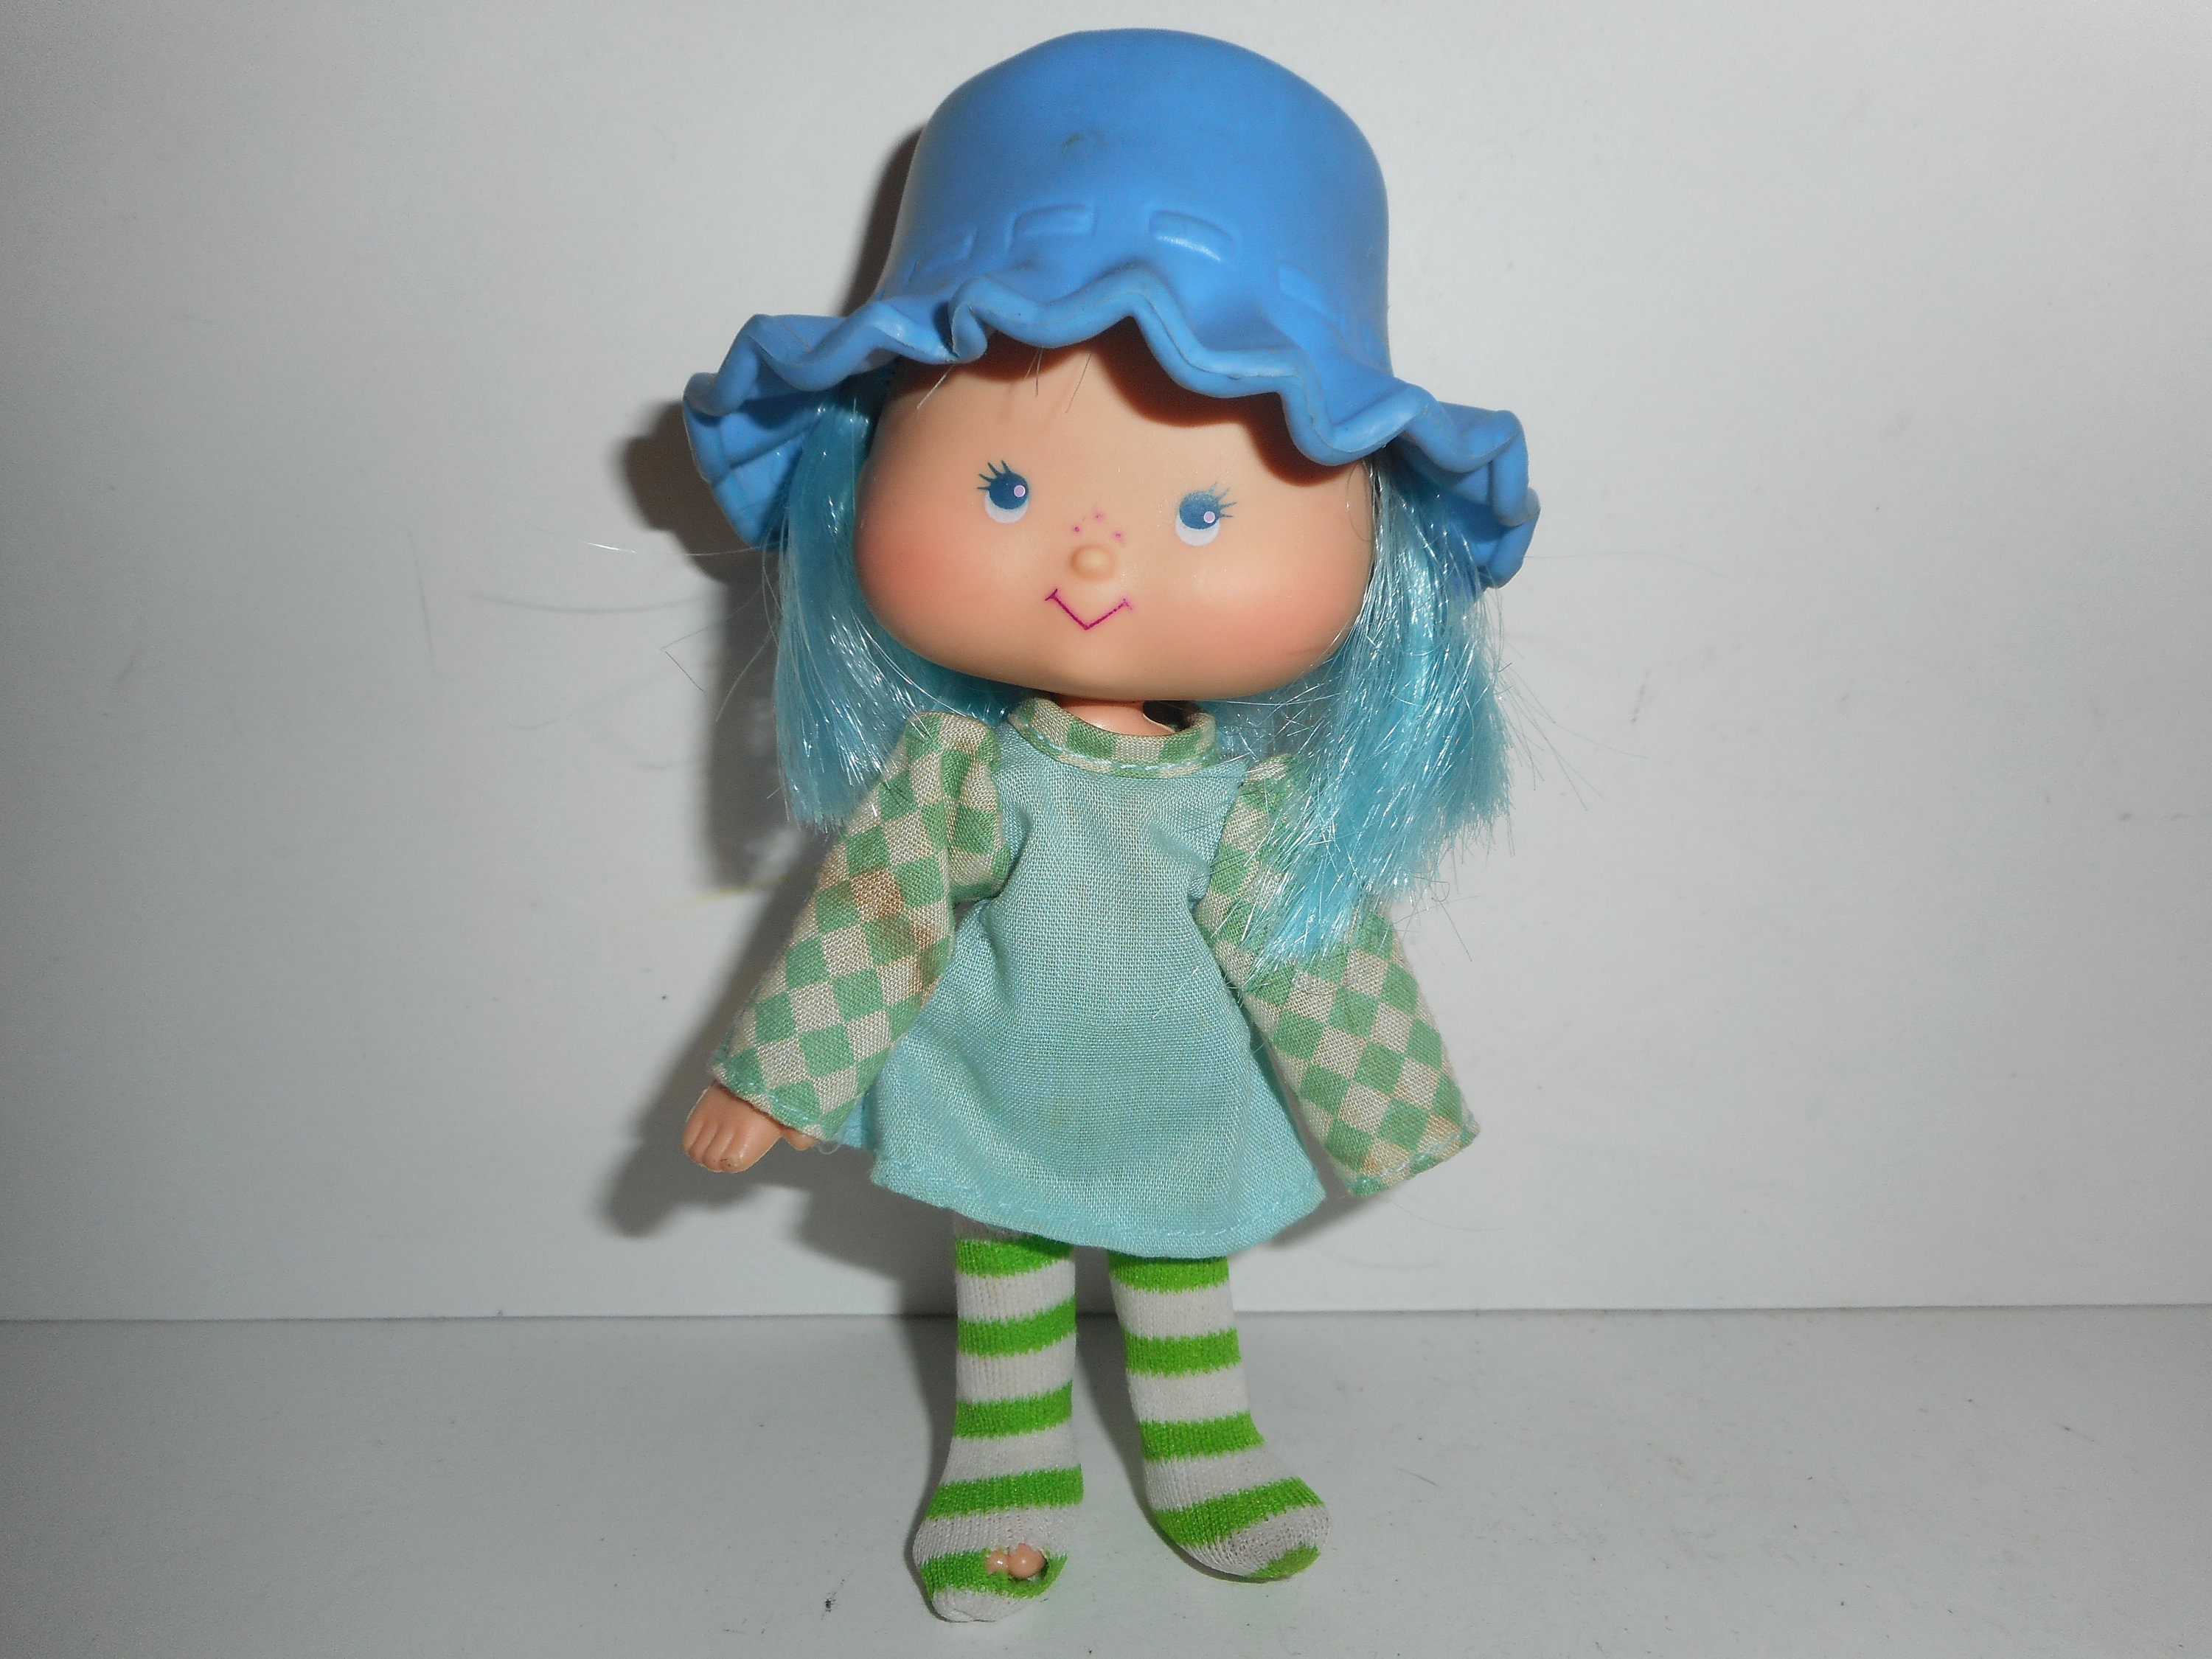 Strawberry Shortcake Blueberry Muffin Doll with Blue Hair and Blueberry Scented Hair - wide 10